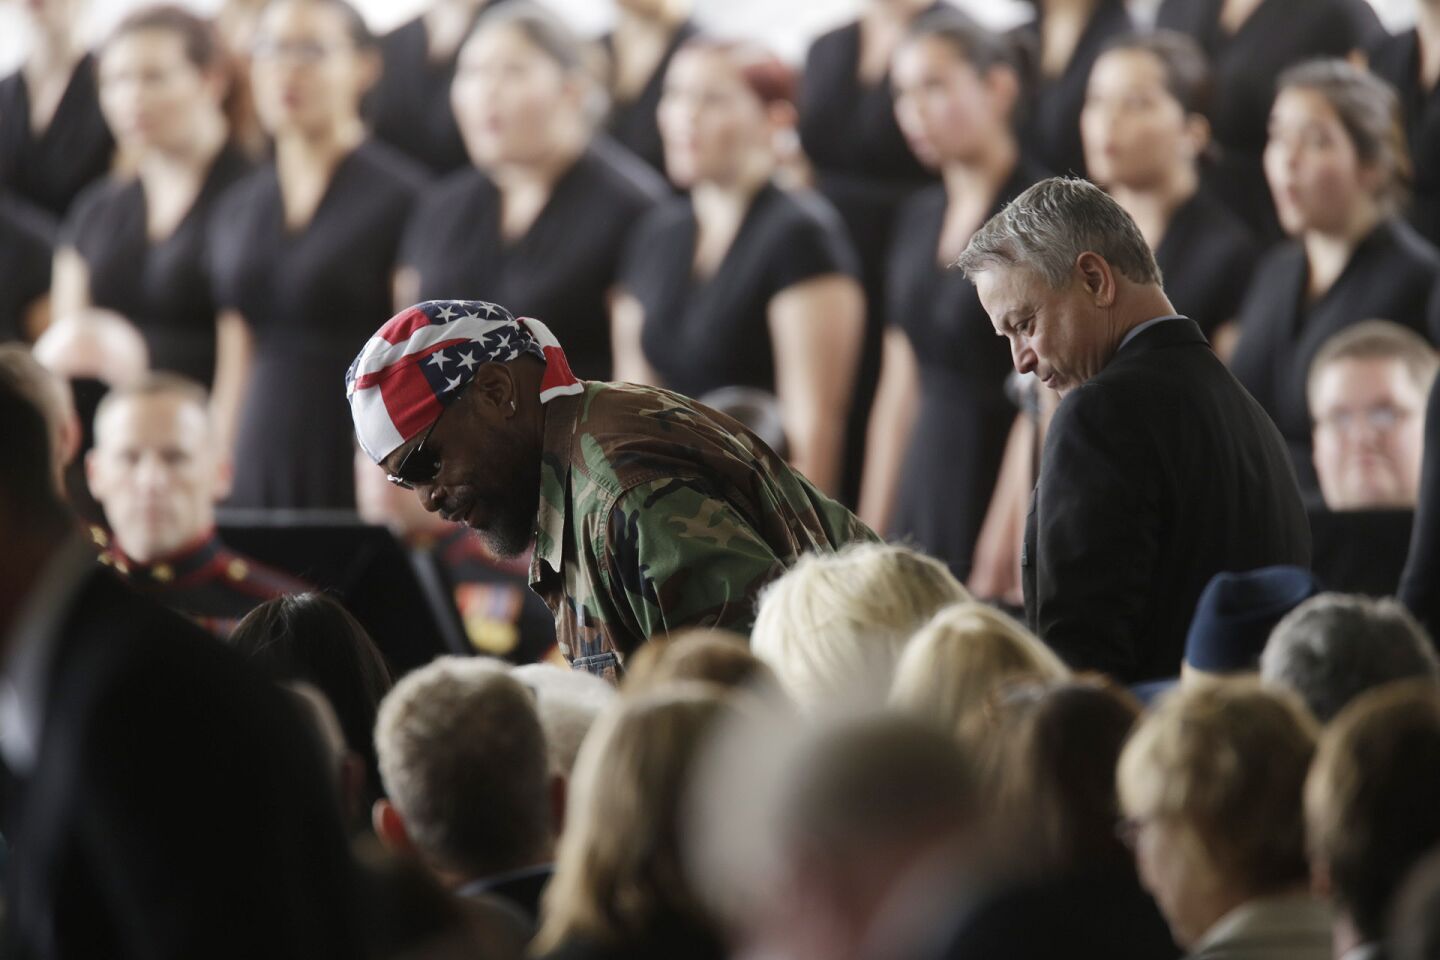 Actors Mr. T, left, and Gary Sinise arrive for the funeral of former First Lady Nancy Reagan at the Ronald Reagan Presidential Library in Simi Valley.